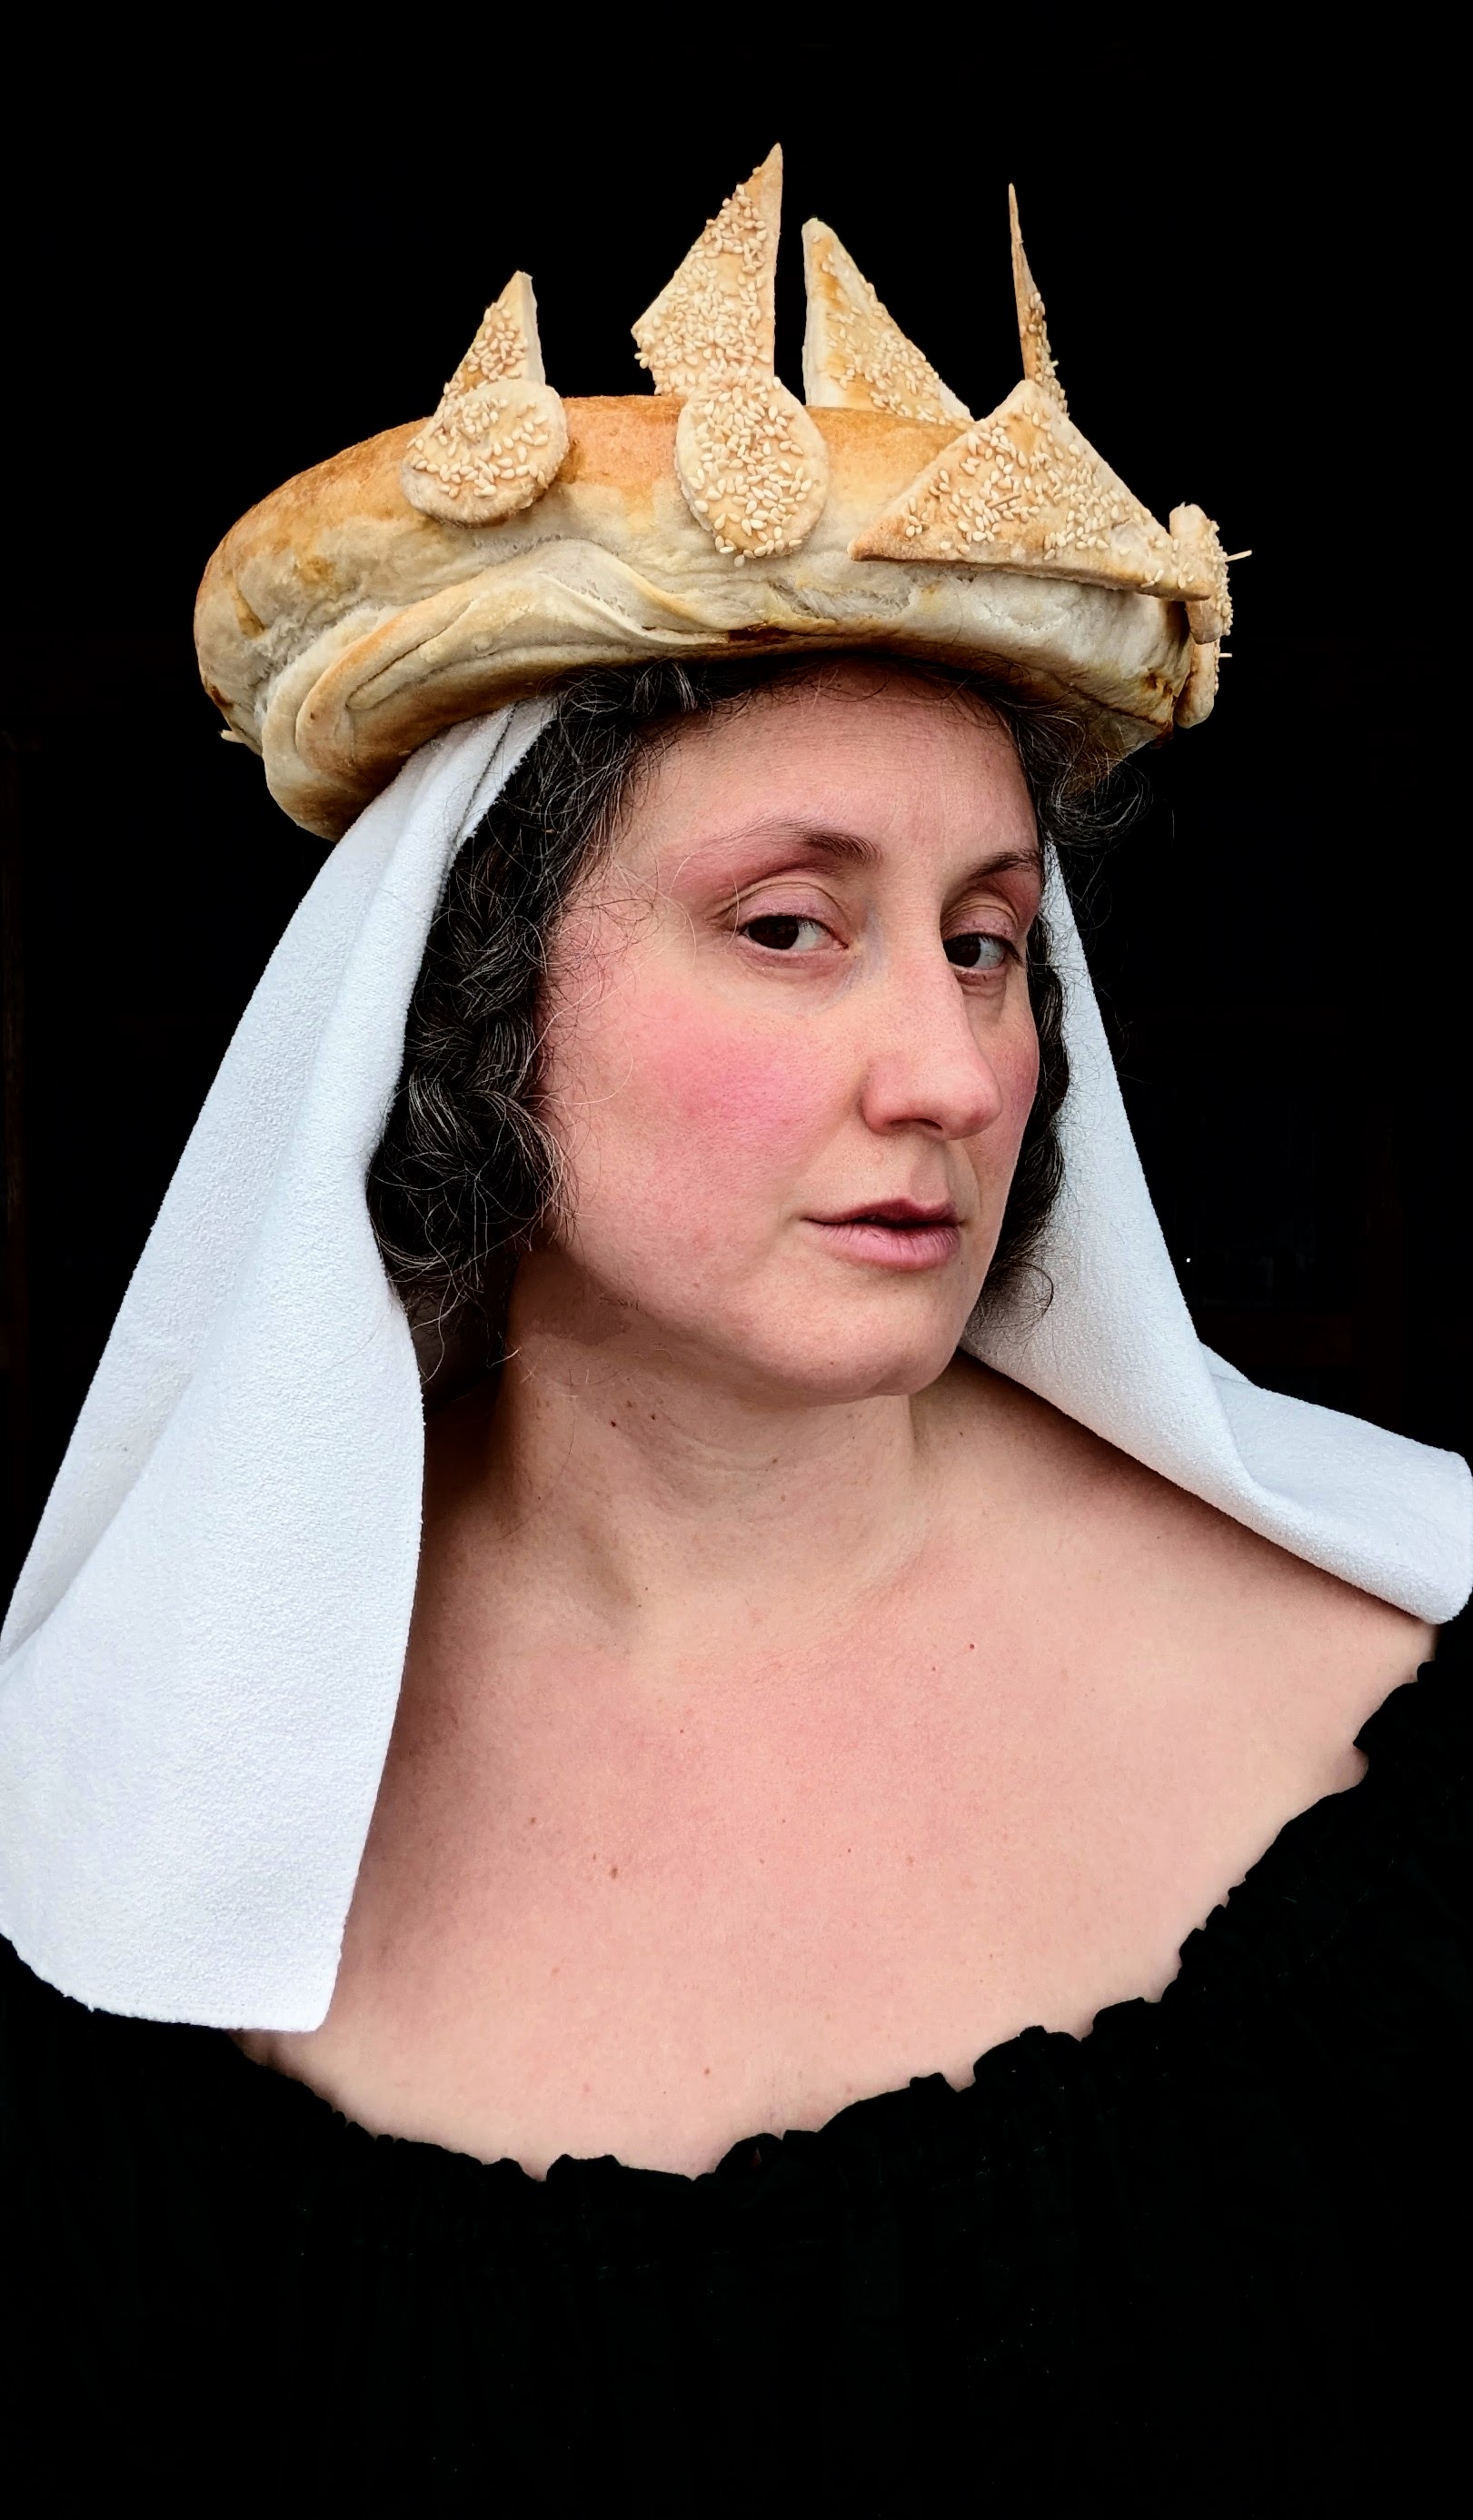 A woman wearing a wimple and crown of bread, posed like a medieval illustration.